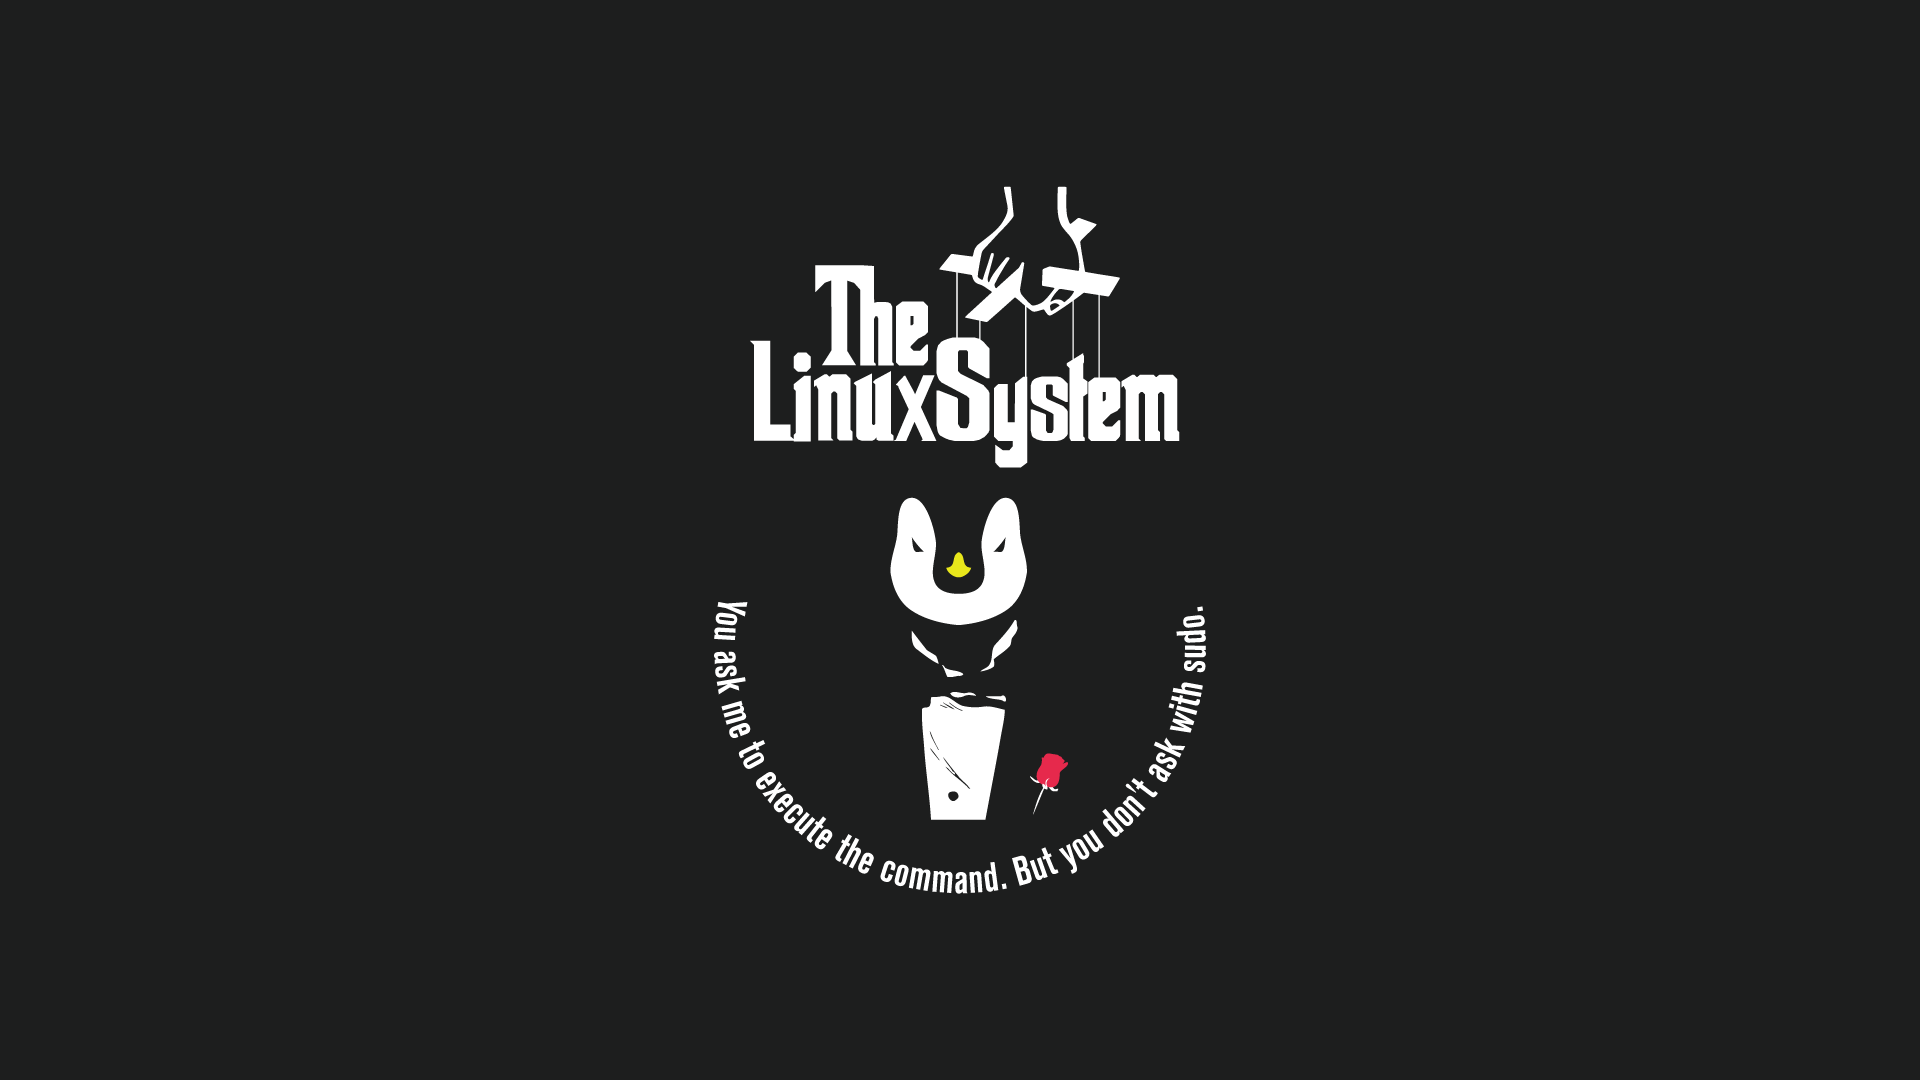 General 1920x1080 Linux Tux The Godfather humor operating system